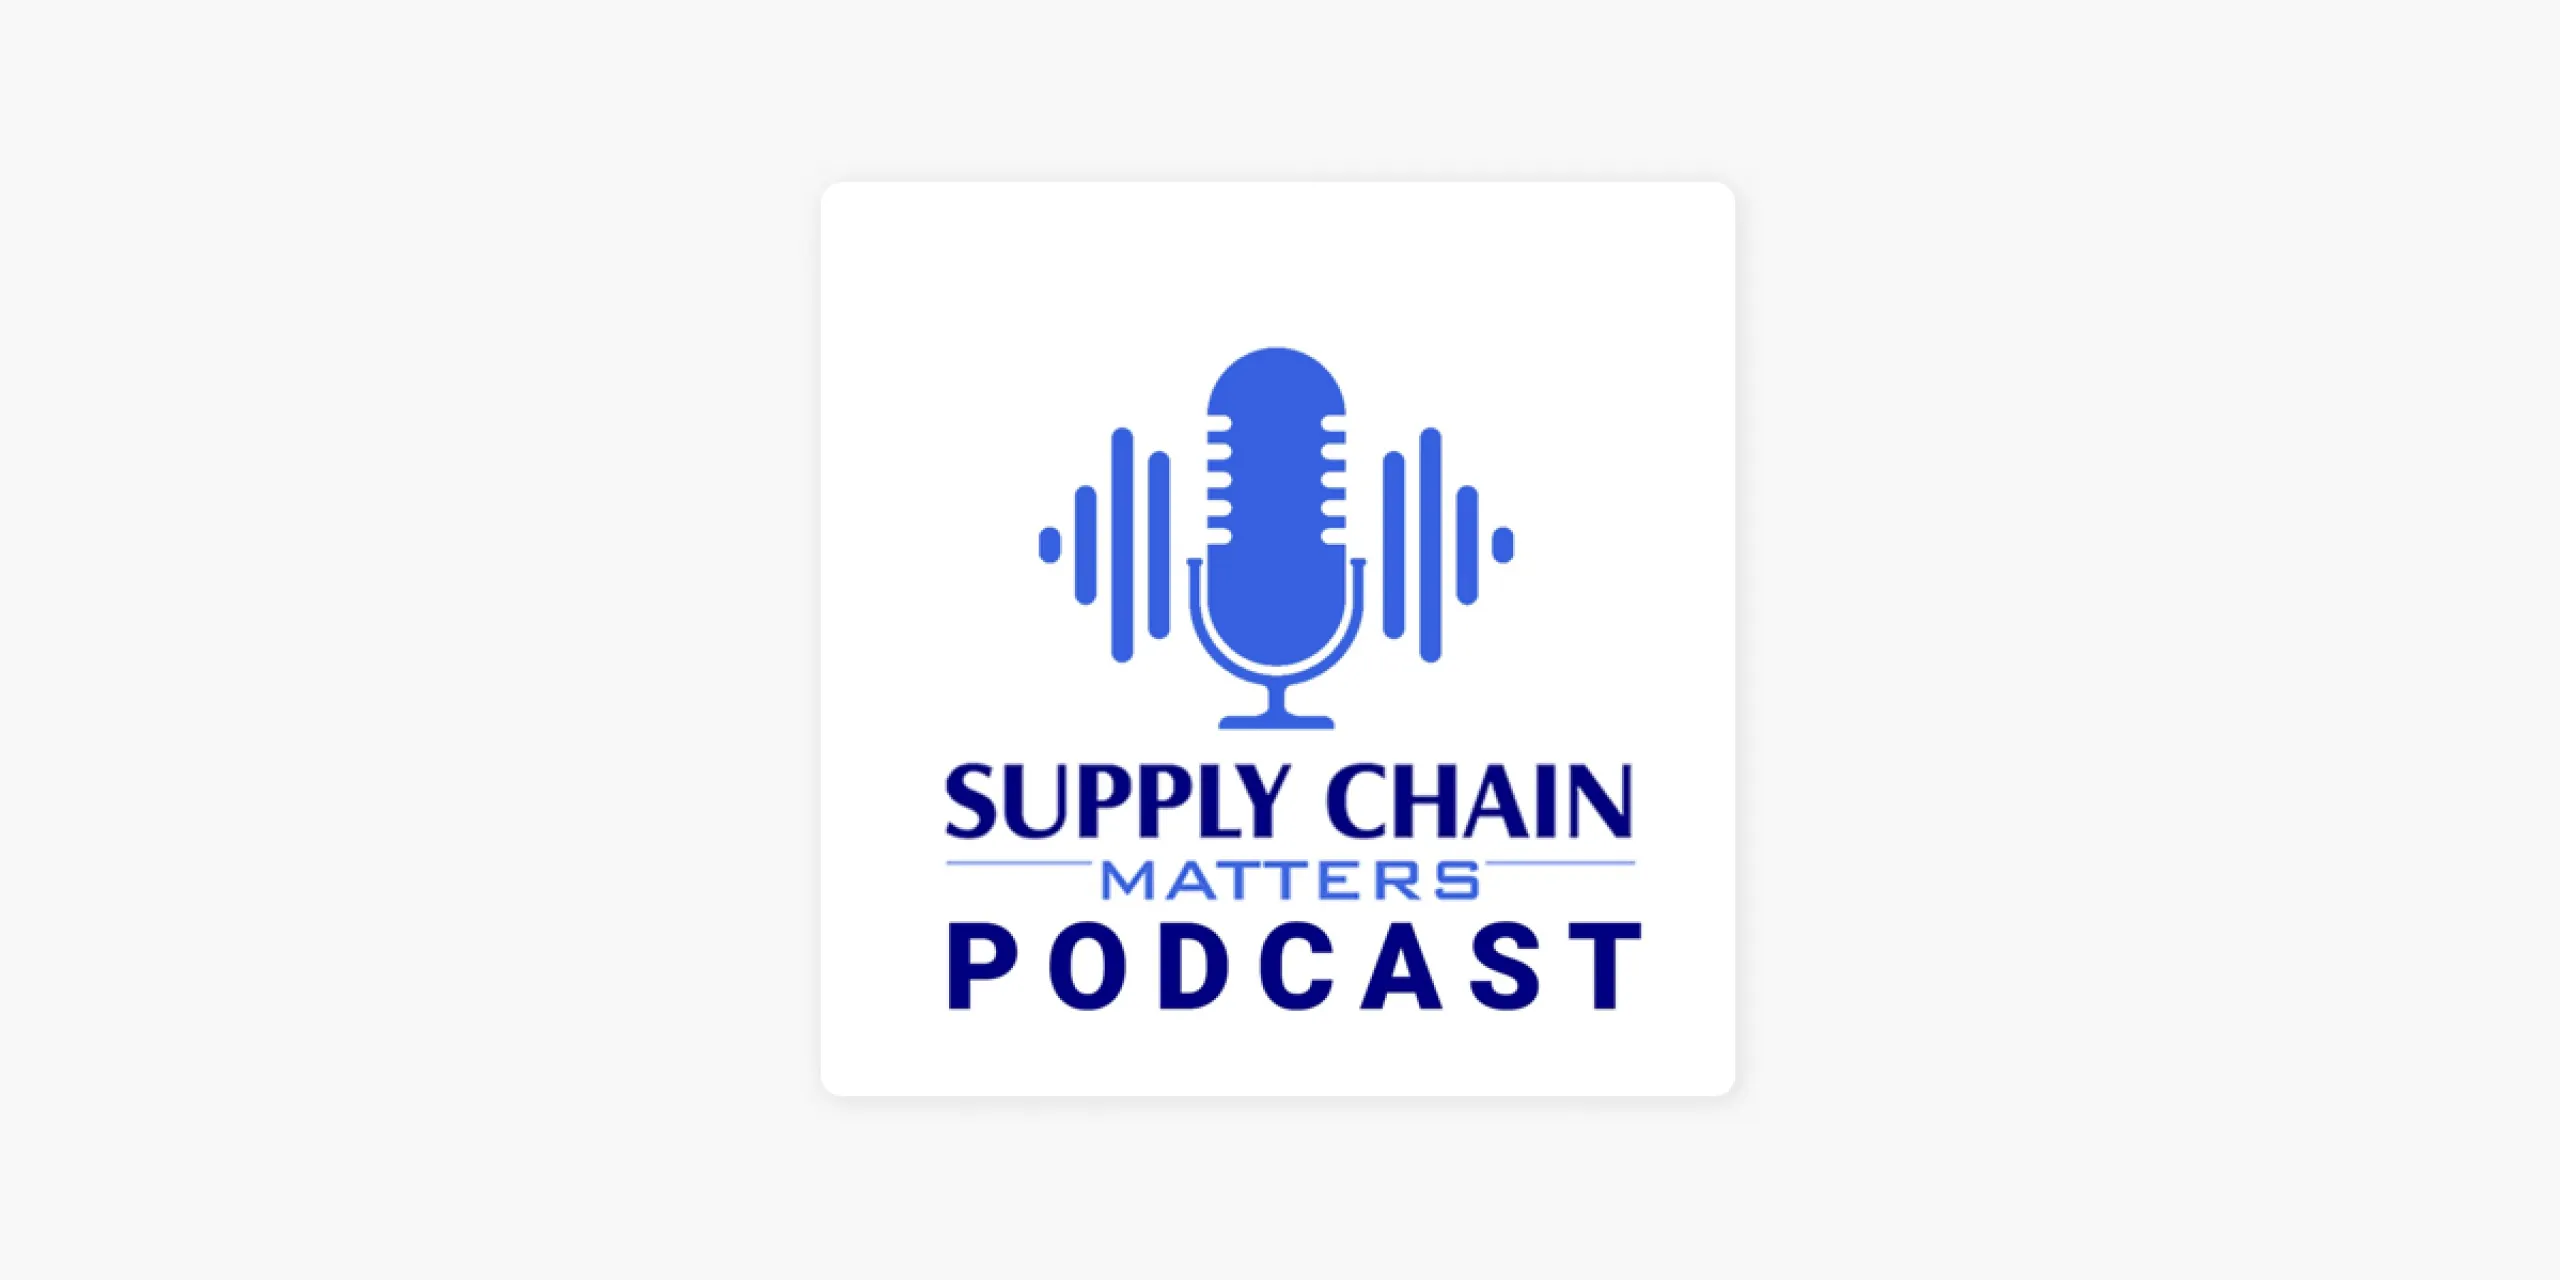 Supply Chain Matters podcast logo